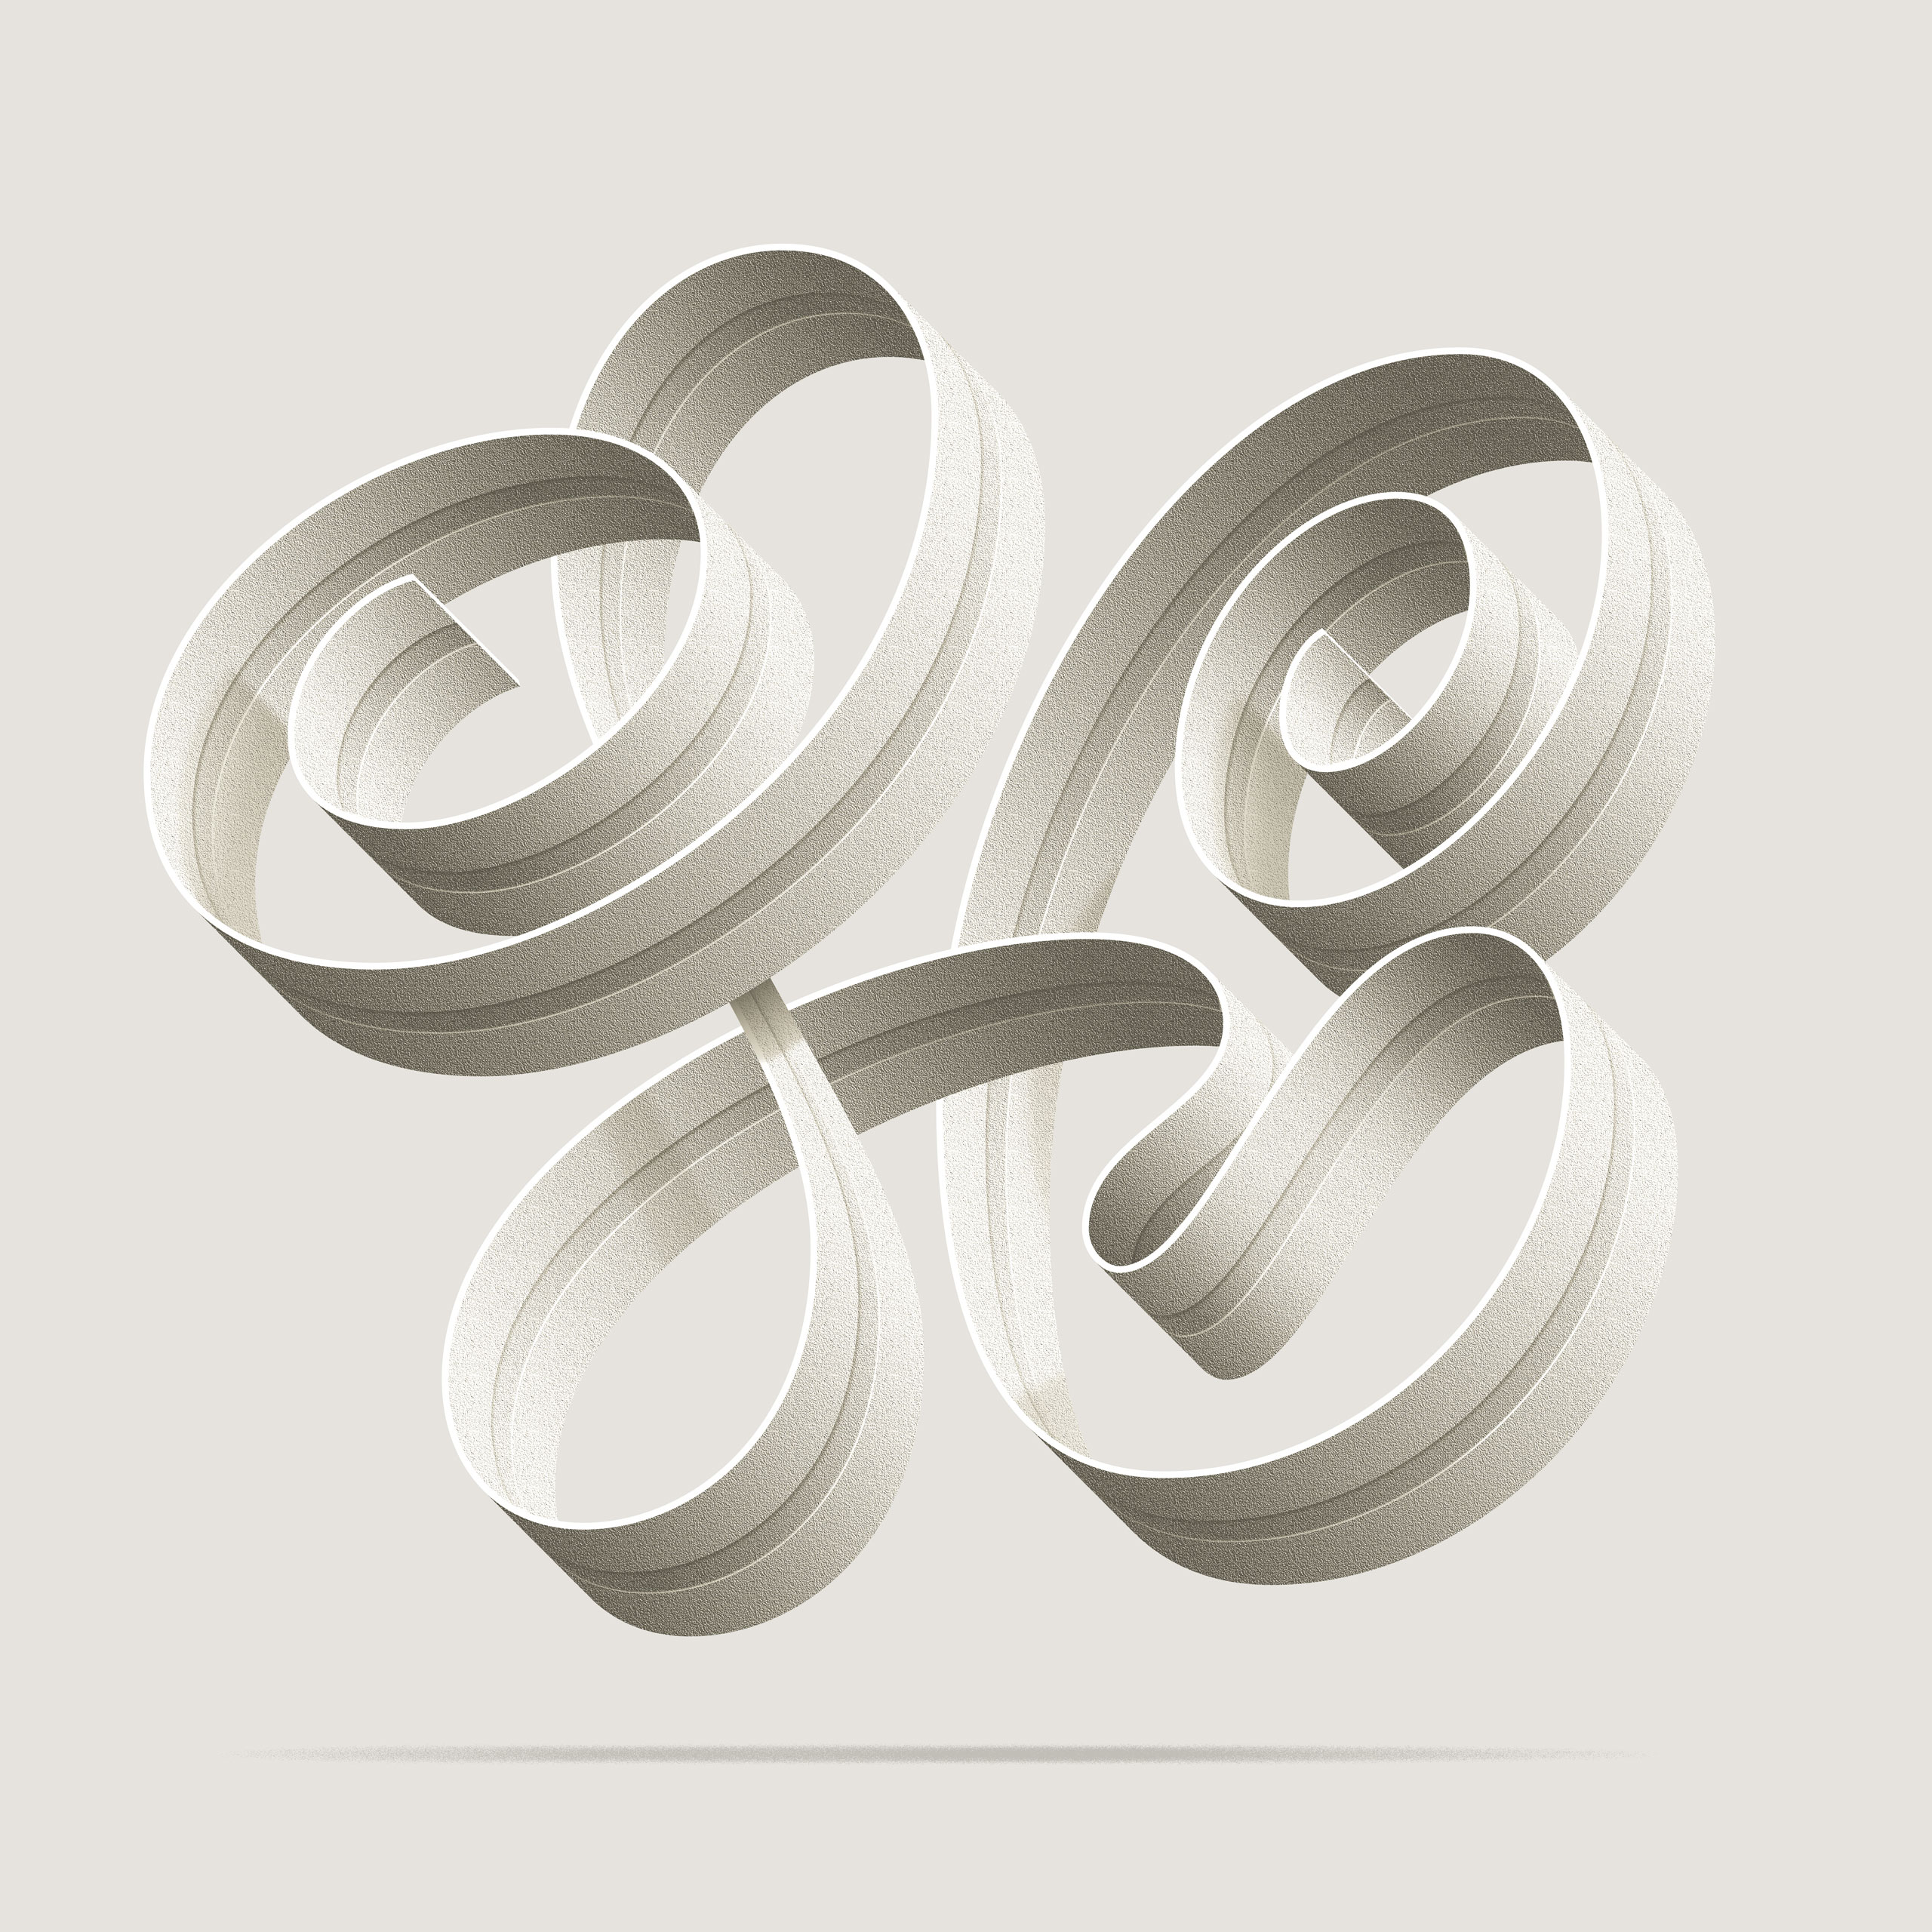 Letter H by Dan Forster - Illustrated type – 3D type